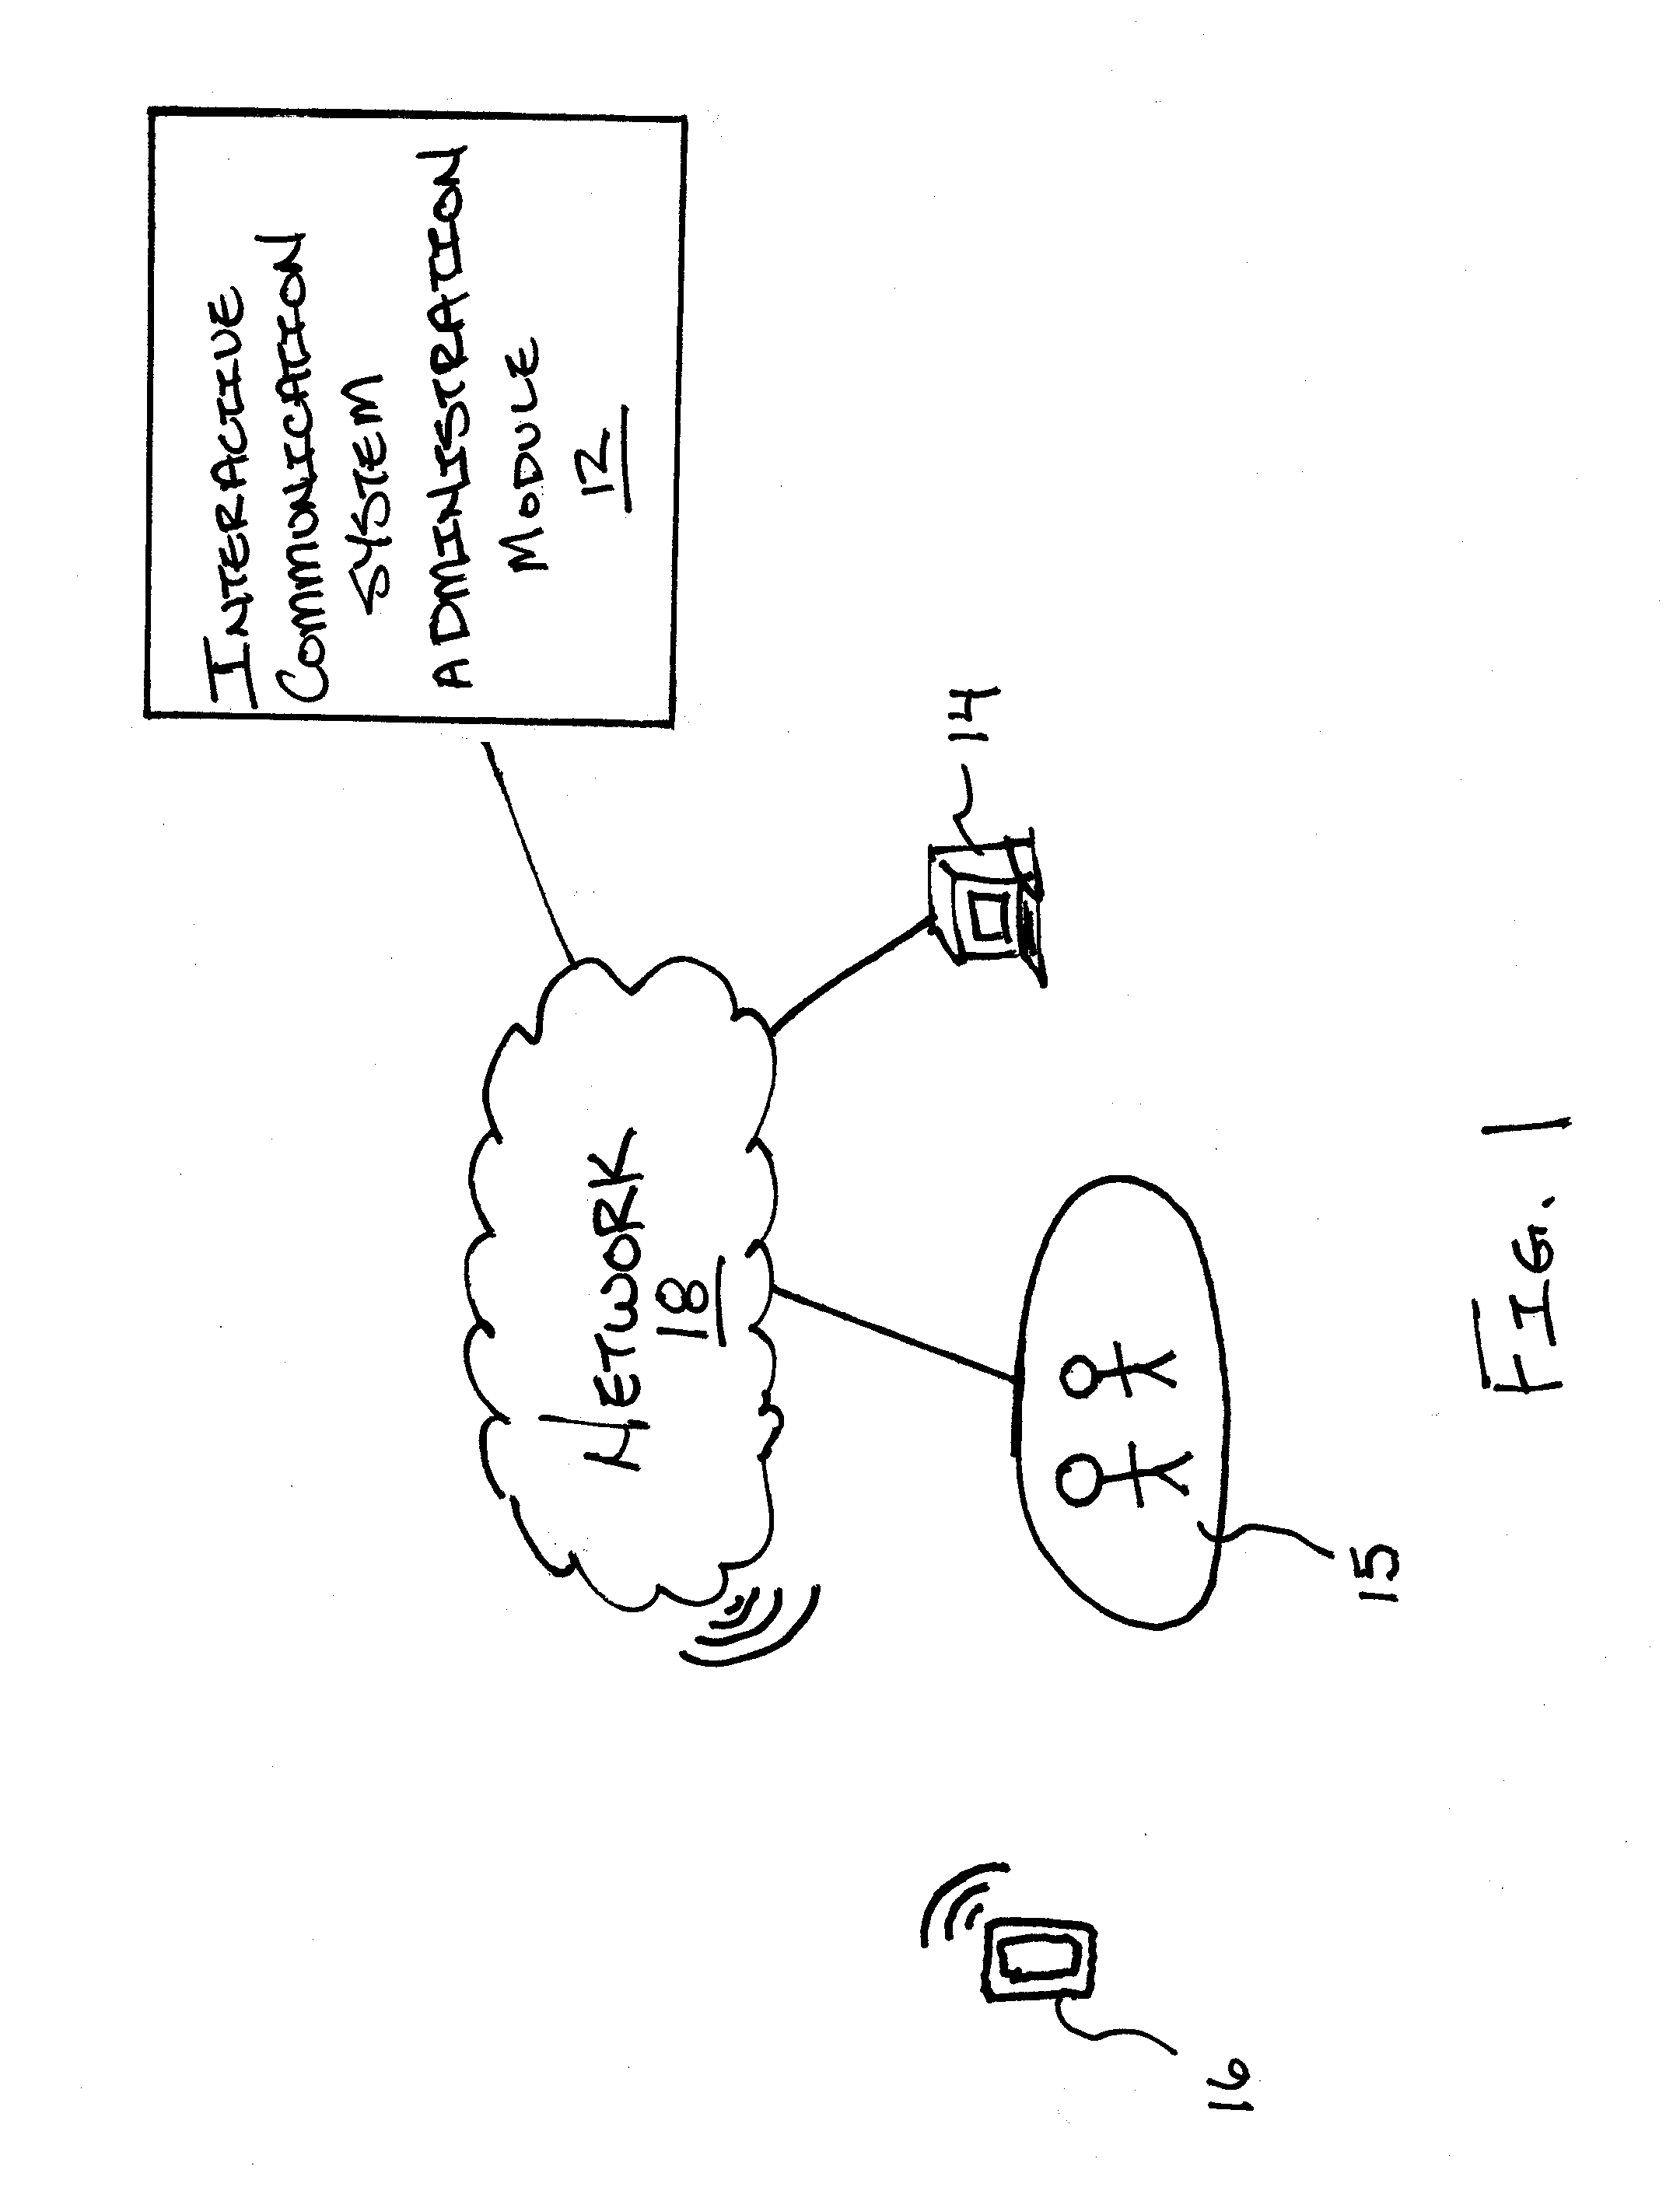 Telephony integrated communication system and method